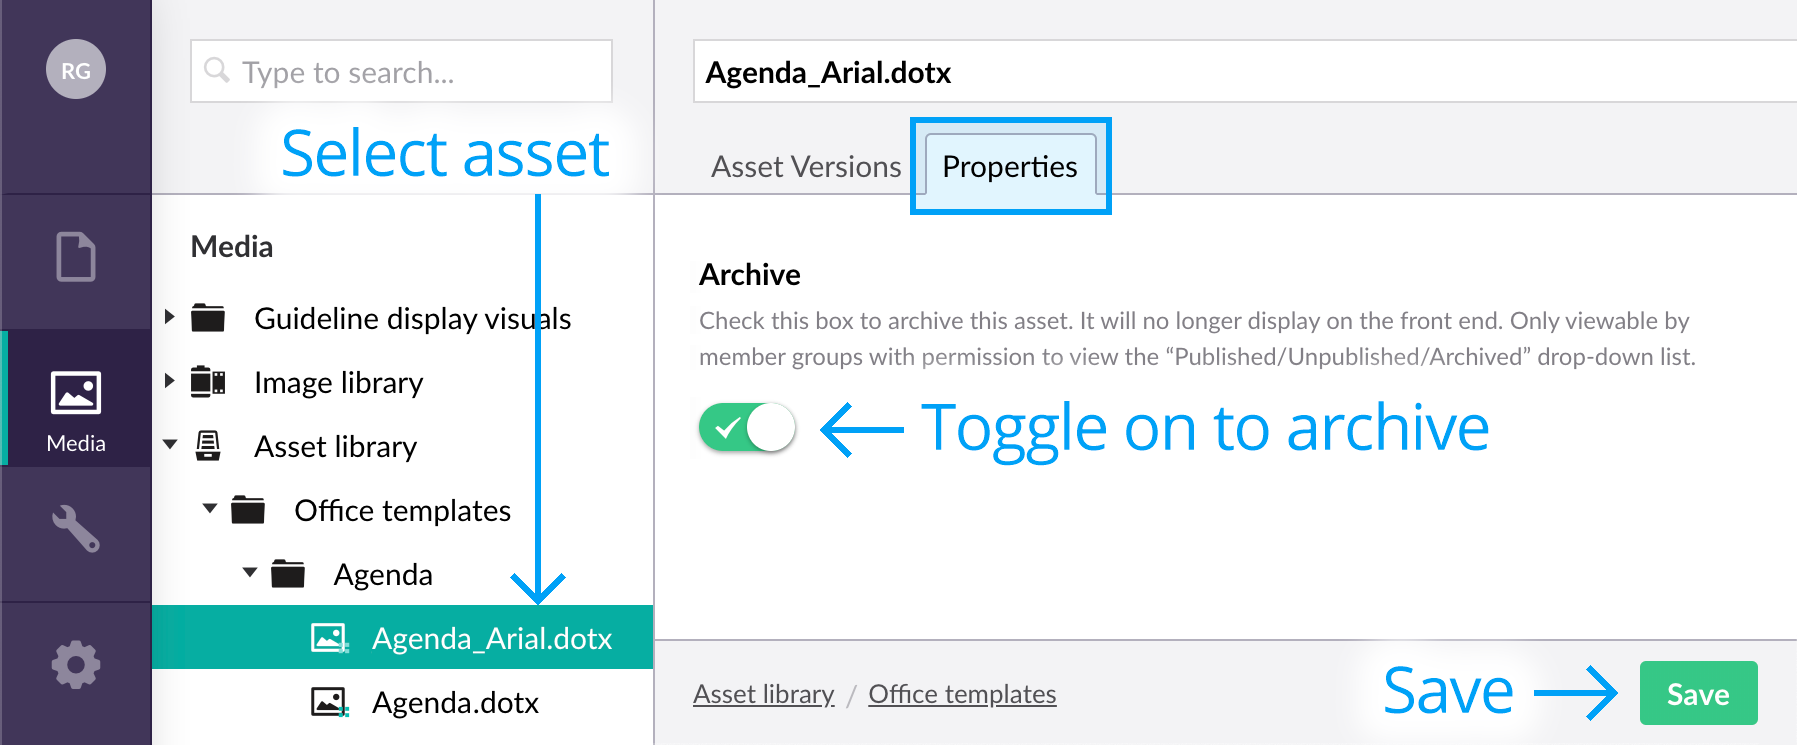 Archiving an asset Archive toggle